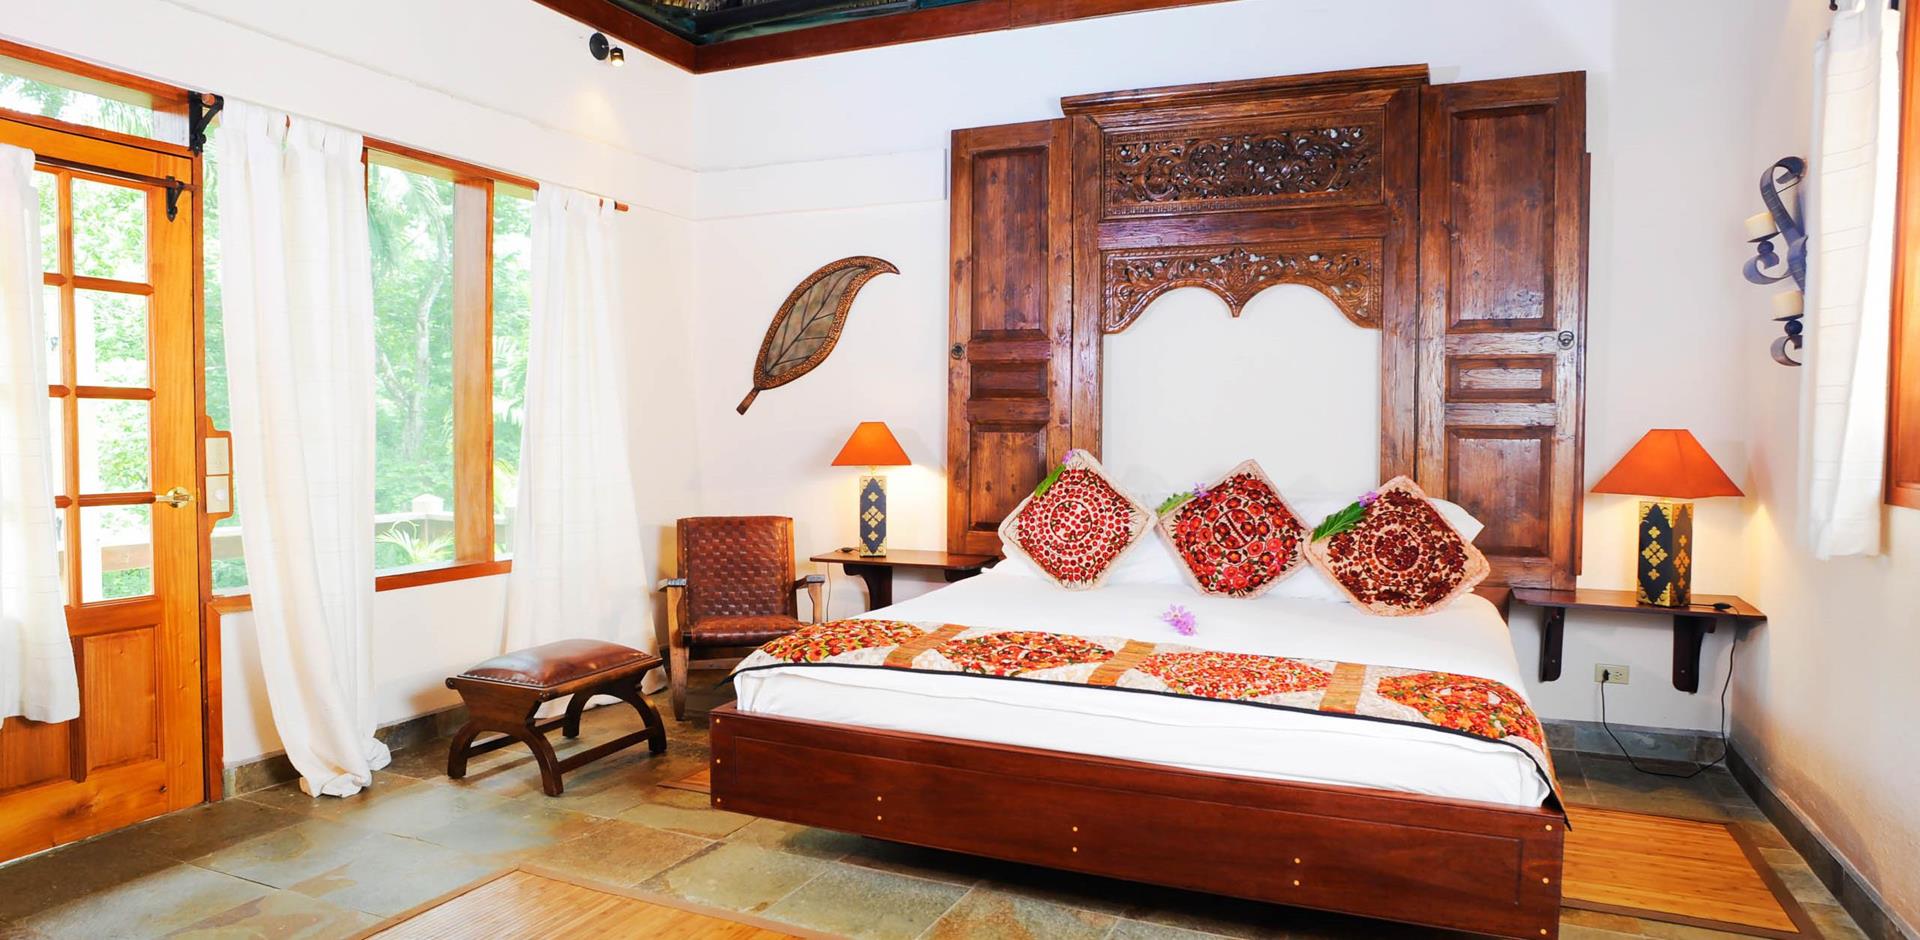 Bedroom, The Lodge at Chaa Creek, Belize, Central America